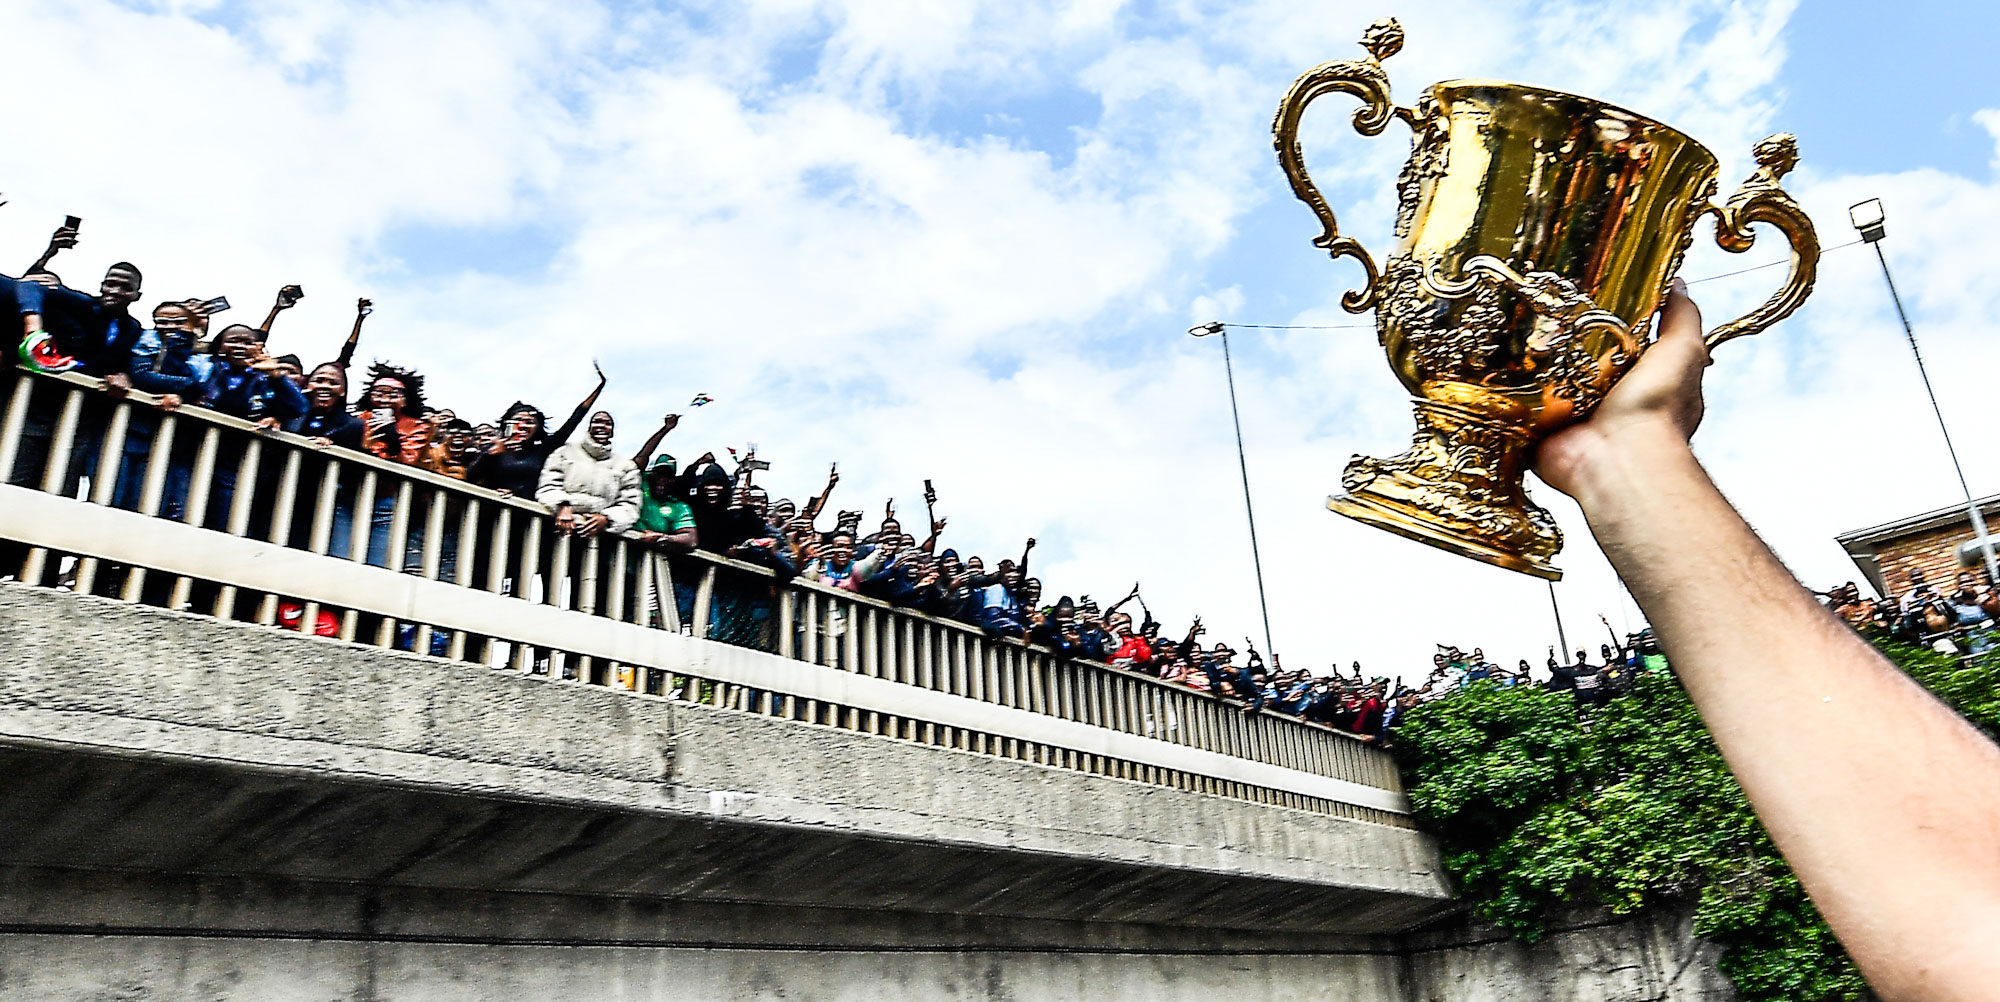 Capetonians packed the street to see the Webb Ellis Cup.